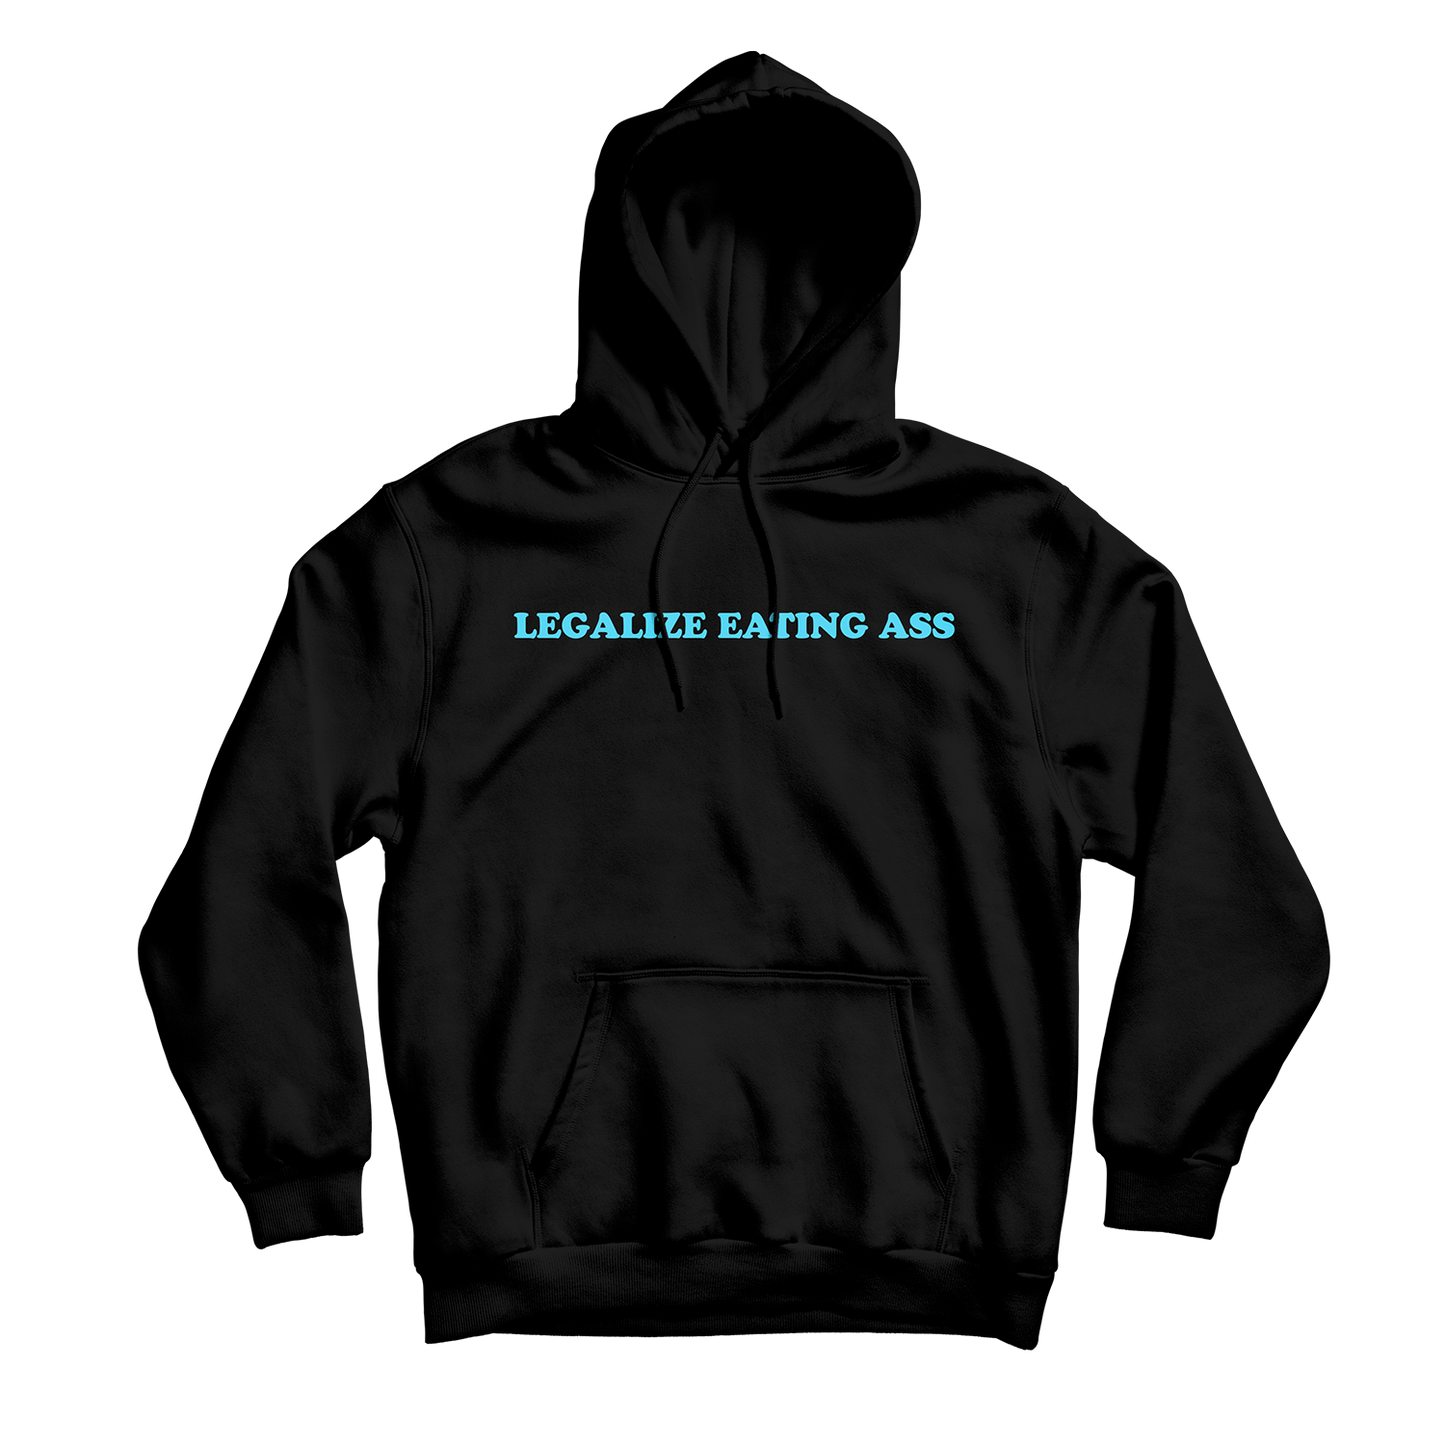 Legalize Eating Ass Hoodie Black